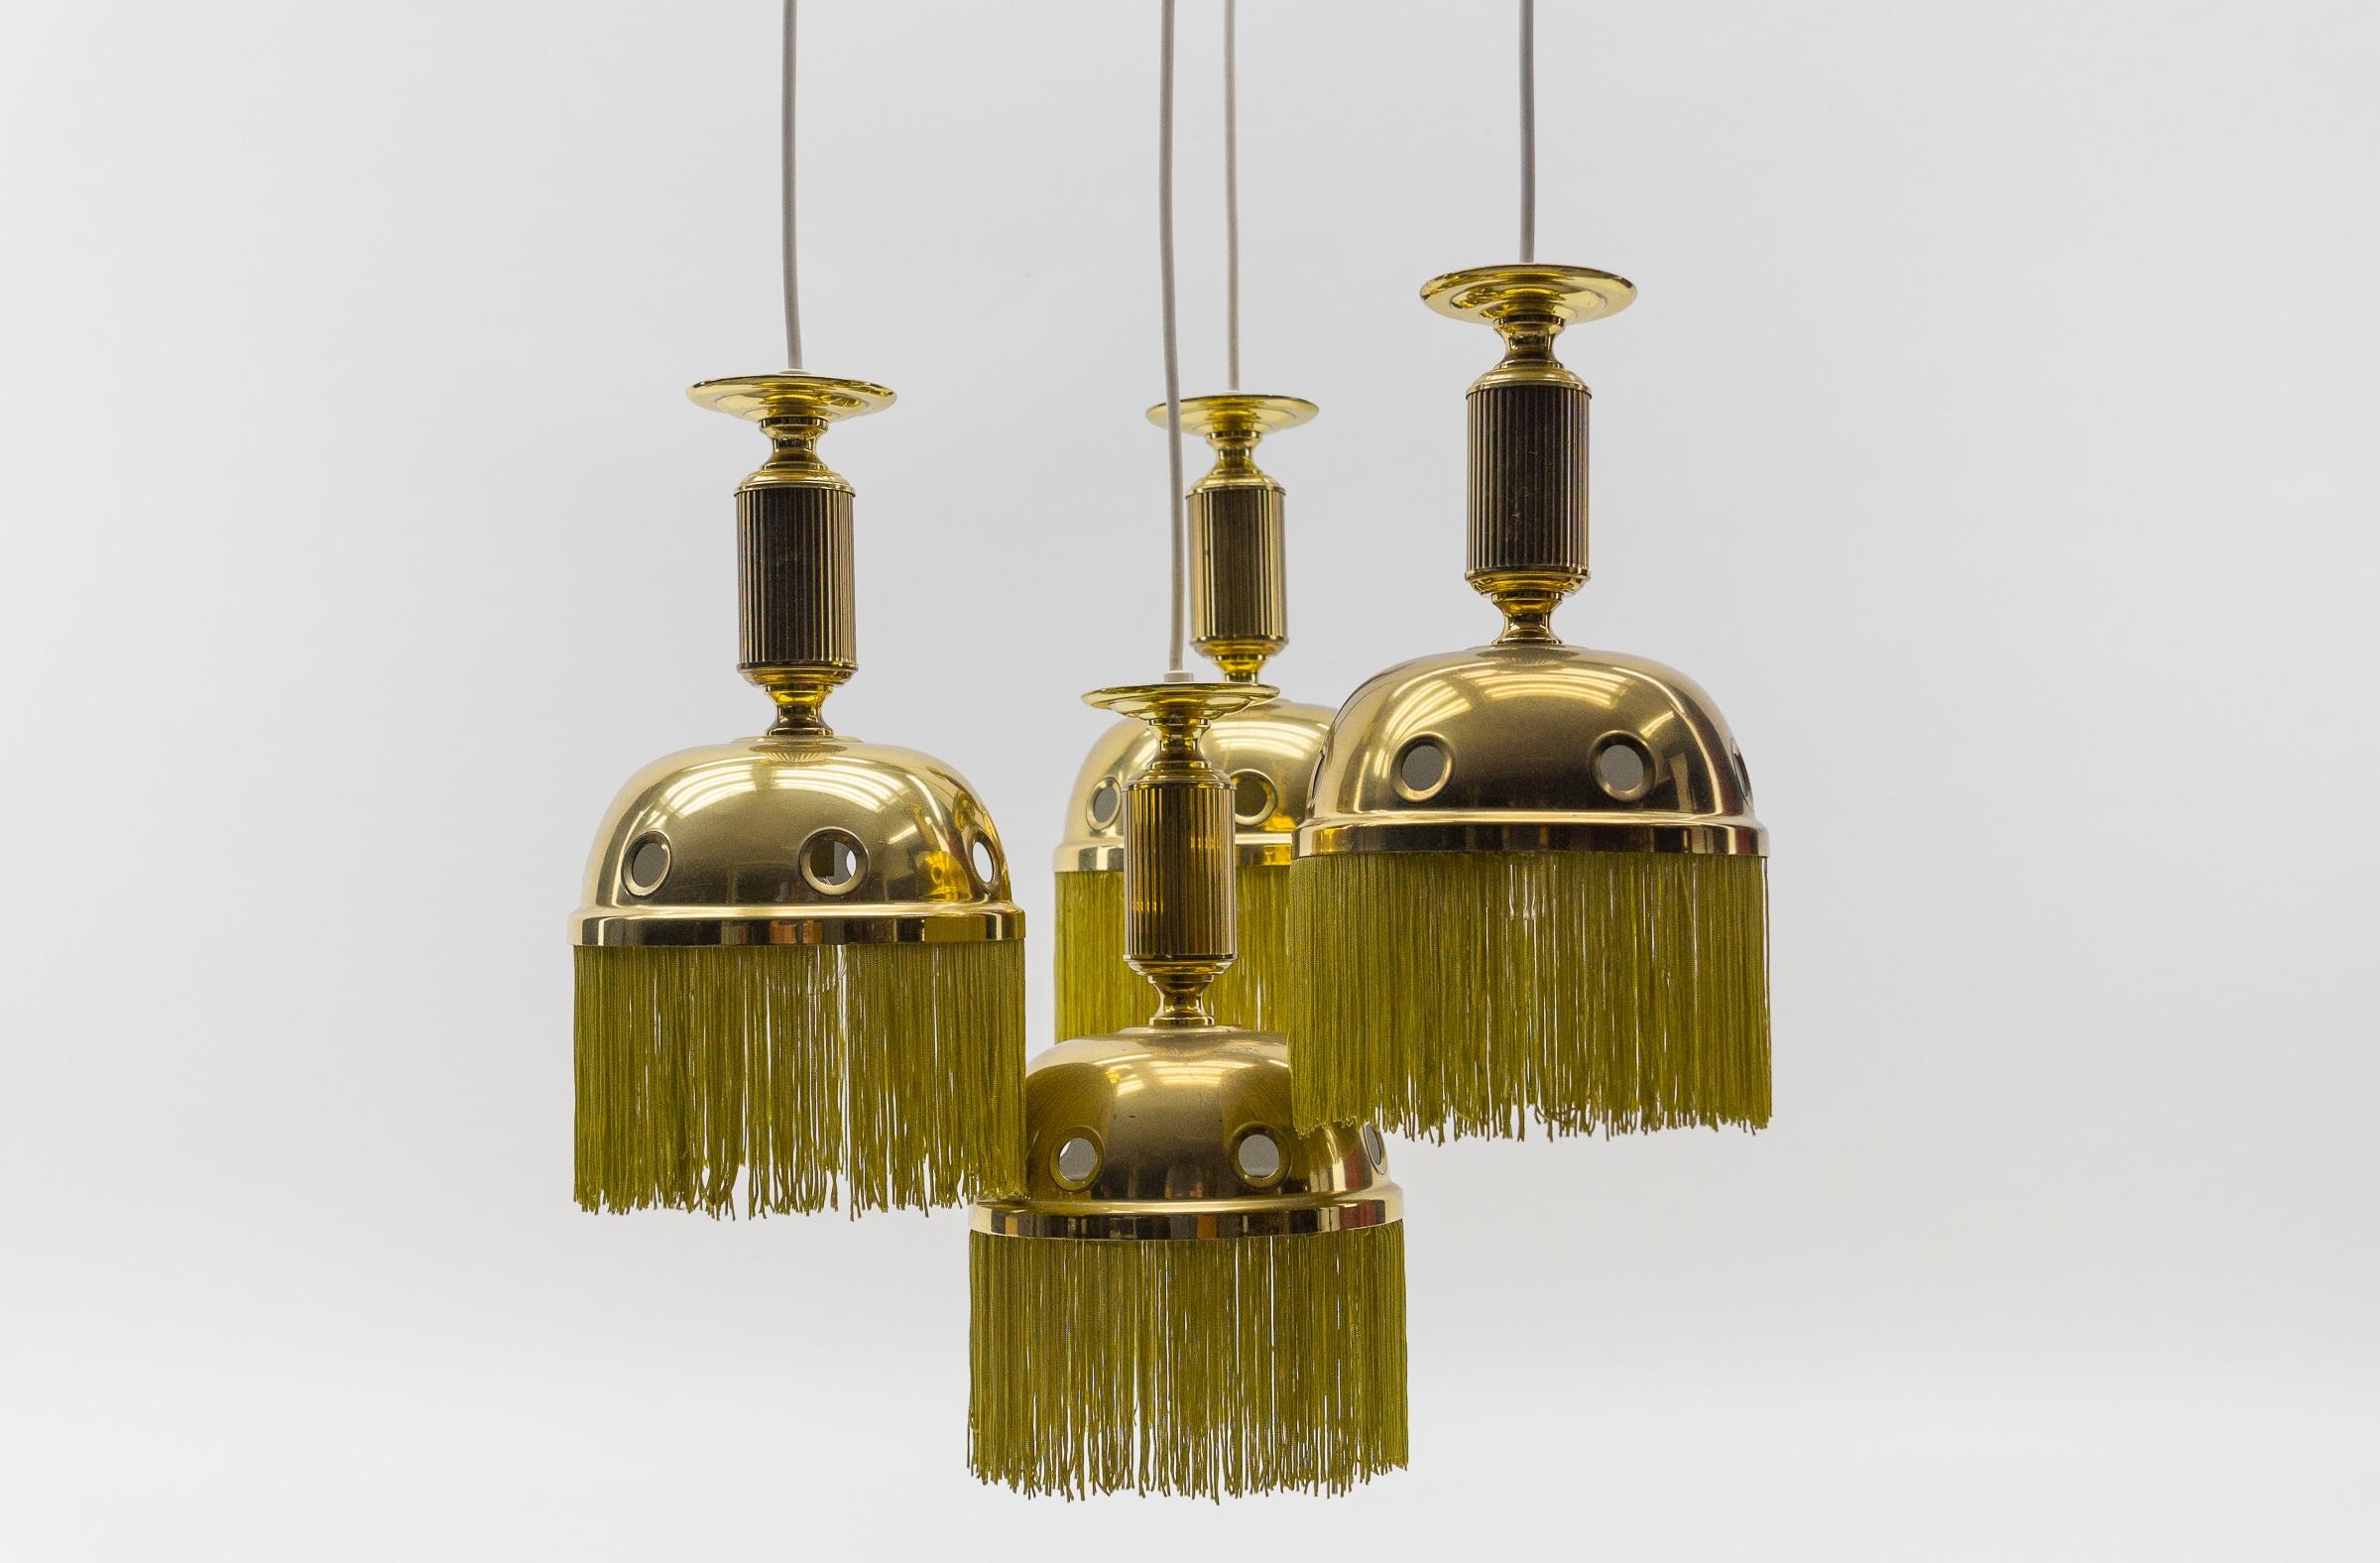 Lovely Cascade in Brass & Silk Strings Attrib, to Hans-Agne Jacobssen, 1960s

Three E14 sockets. Works with 220V and 110V.

Light bulbs are not included.
It is possible to install this fixture in all countries (US, Australia, Asia, UK, Europe,..)